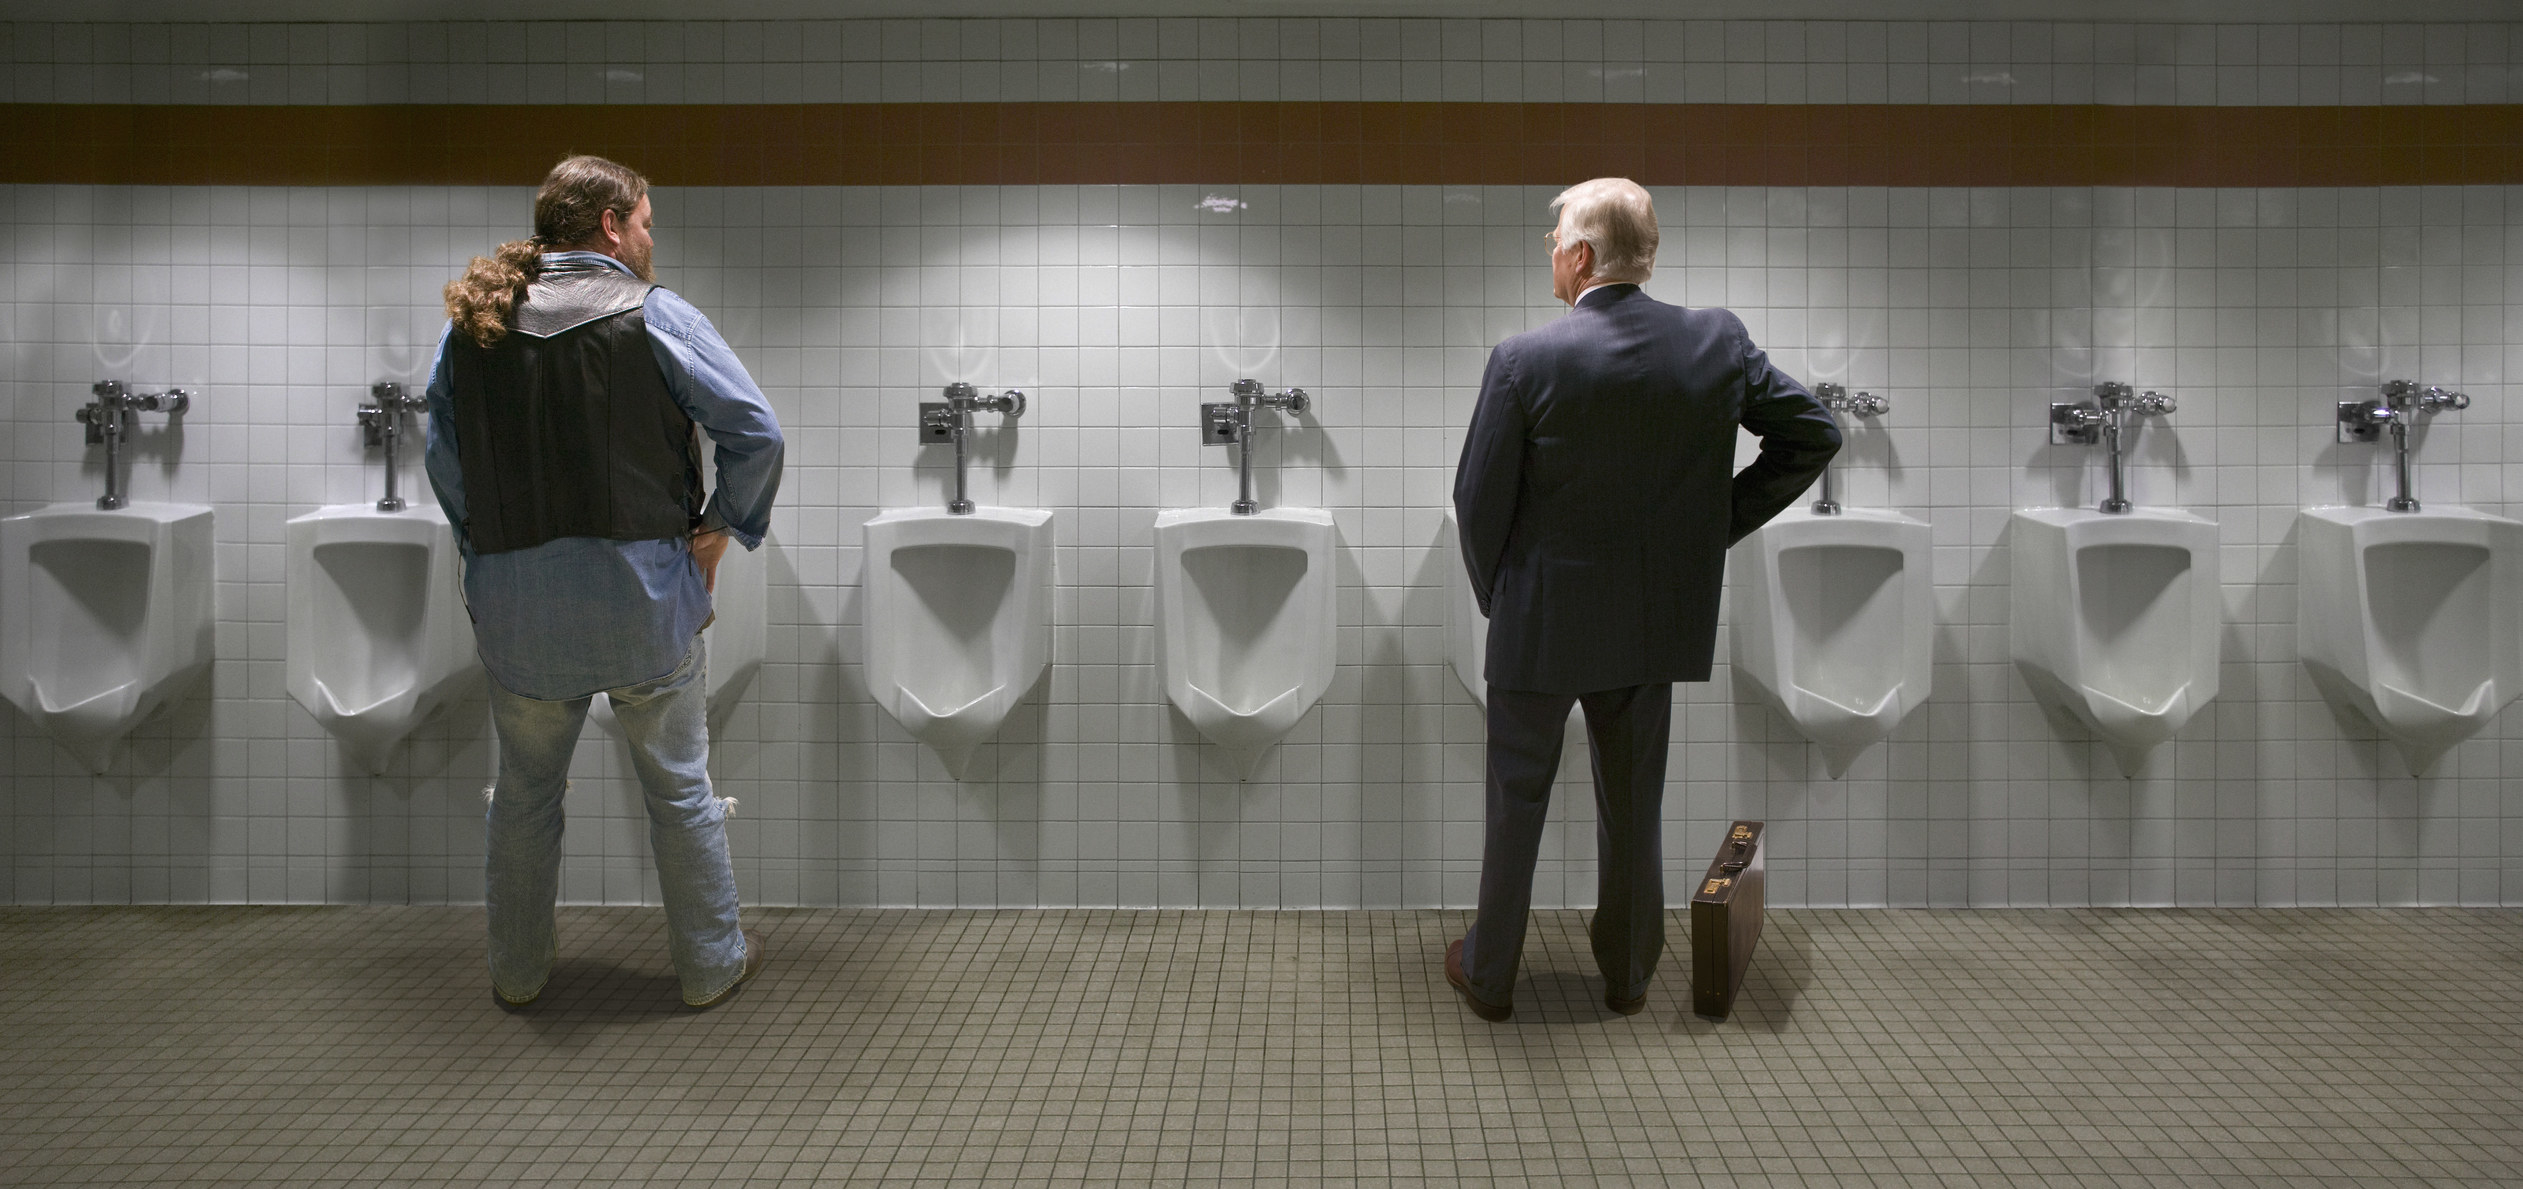 4. "If a public restroom isn’t crowded, do not take a stall/urinal imm...